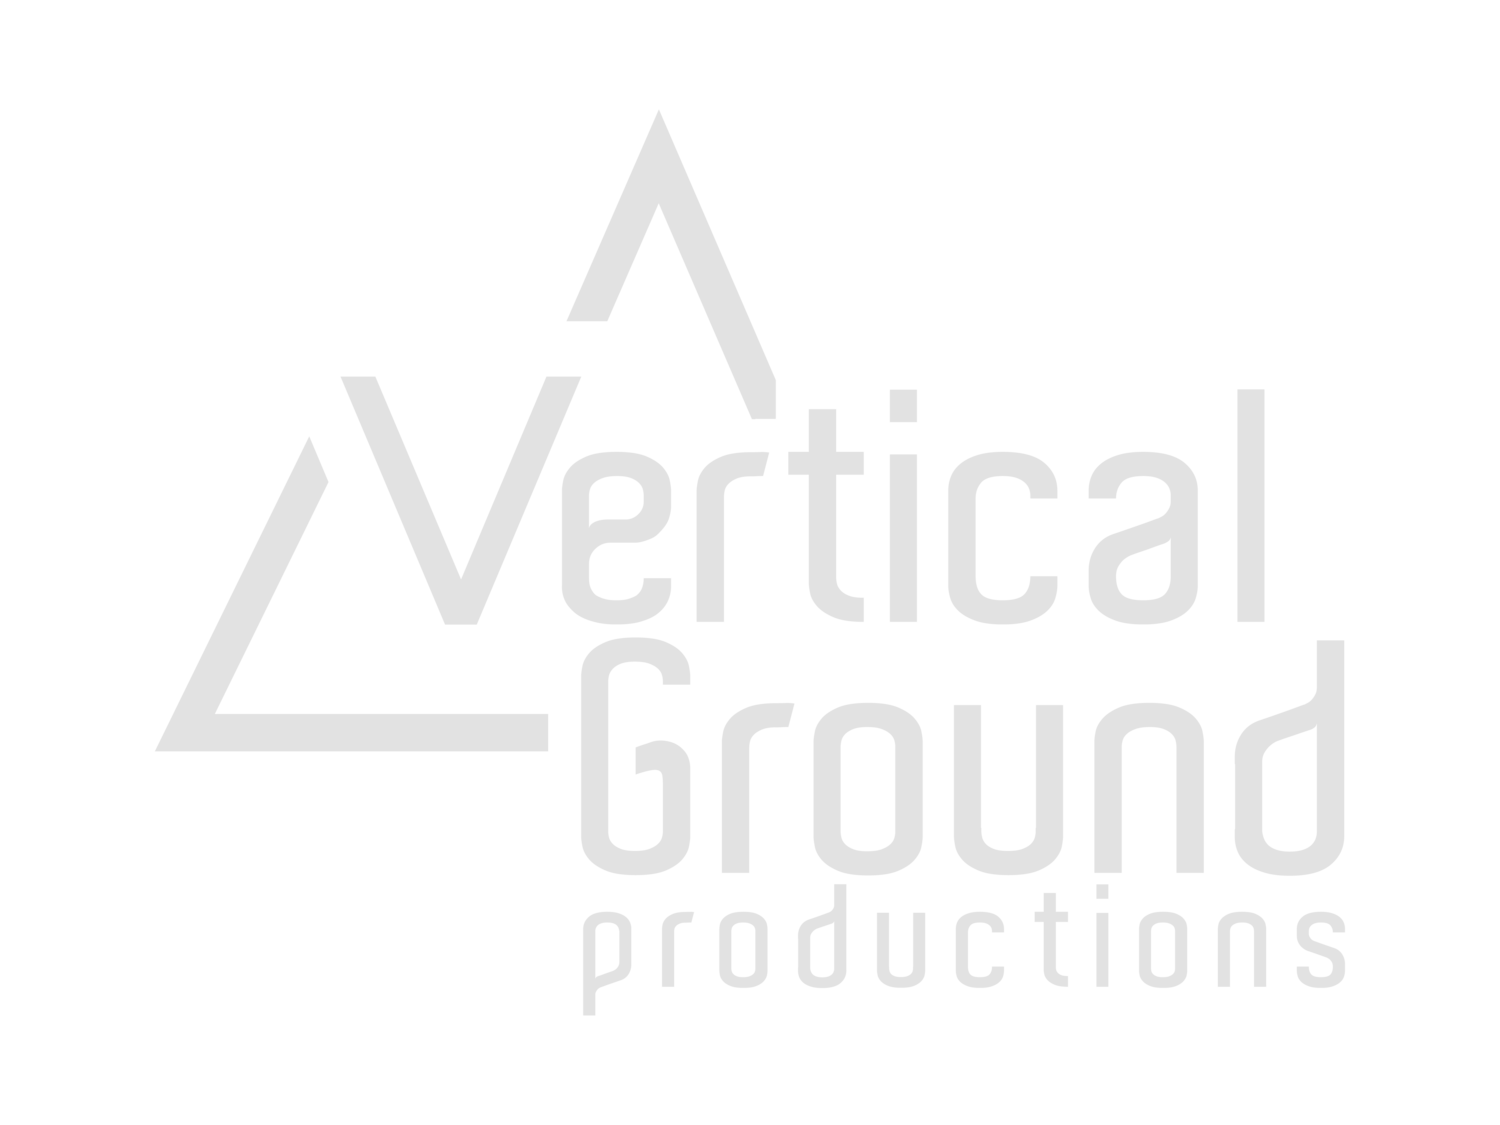 Vertical Ground Productions